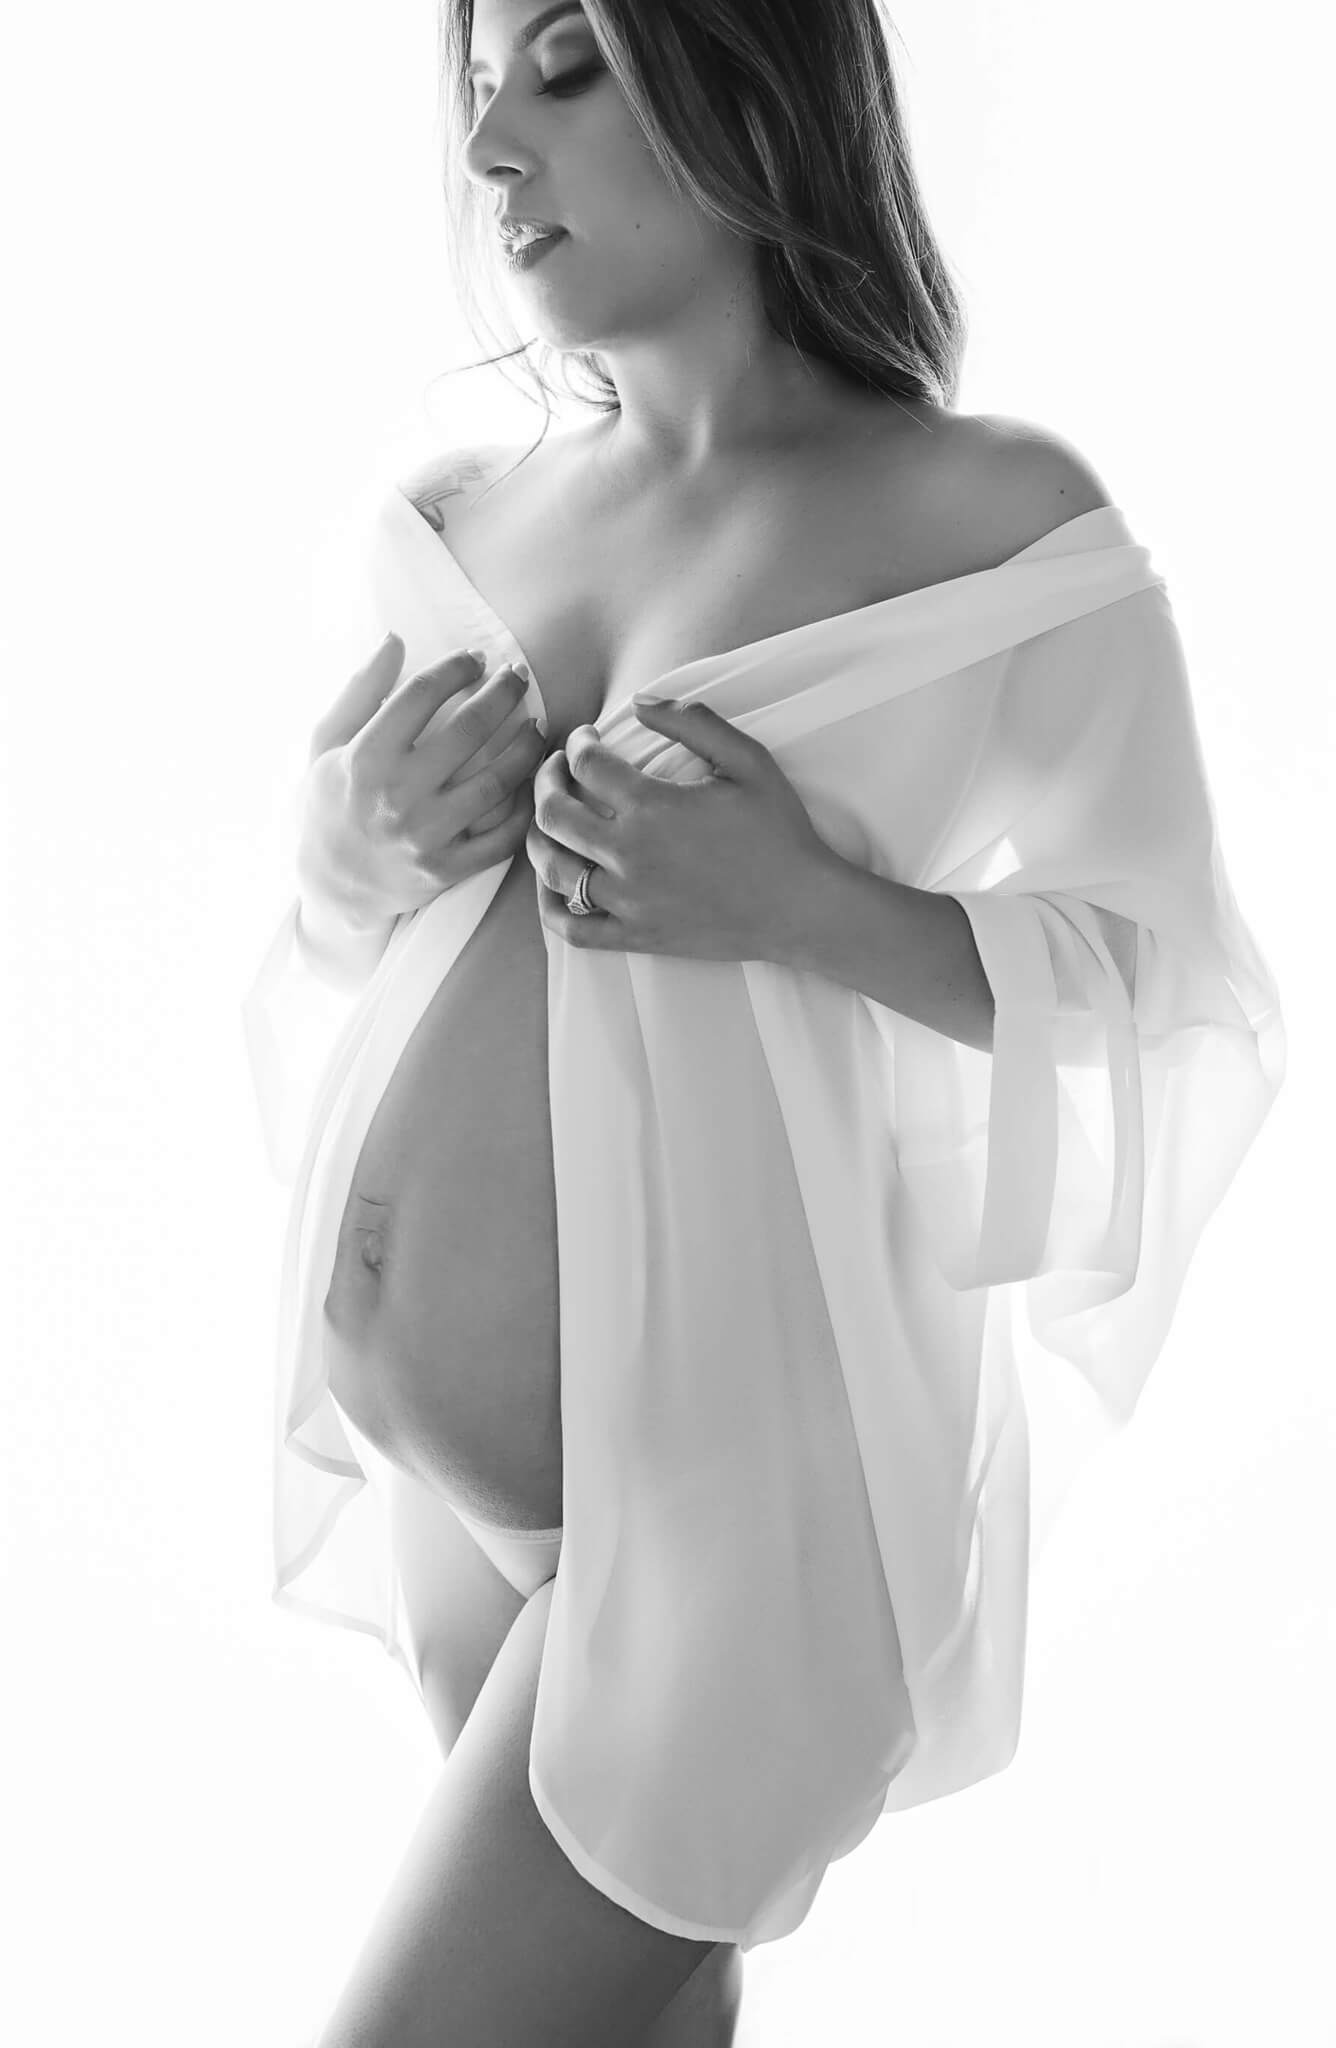 A mother to be stands in a studio backlit in a sheer white slip and underwear after meeting austin doulas